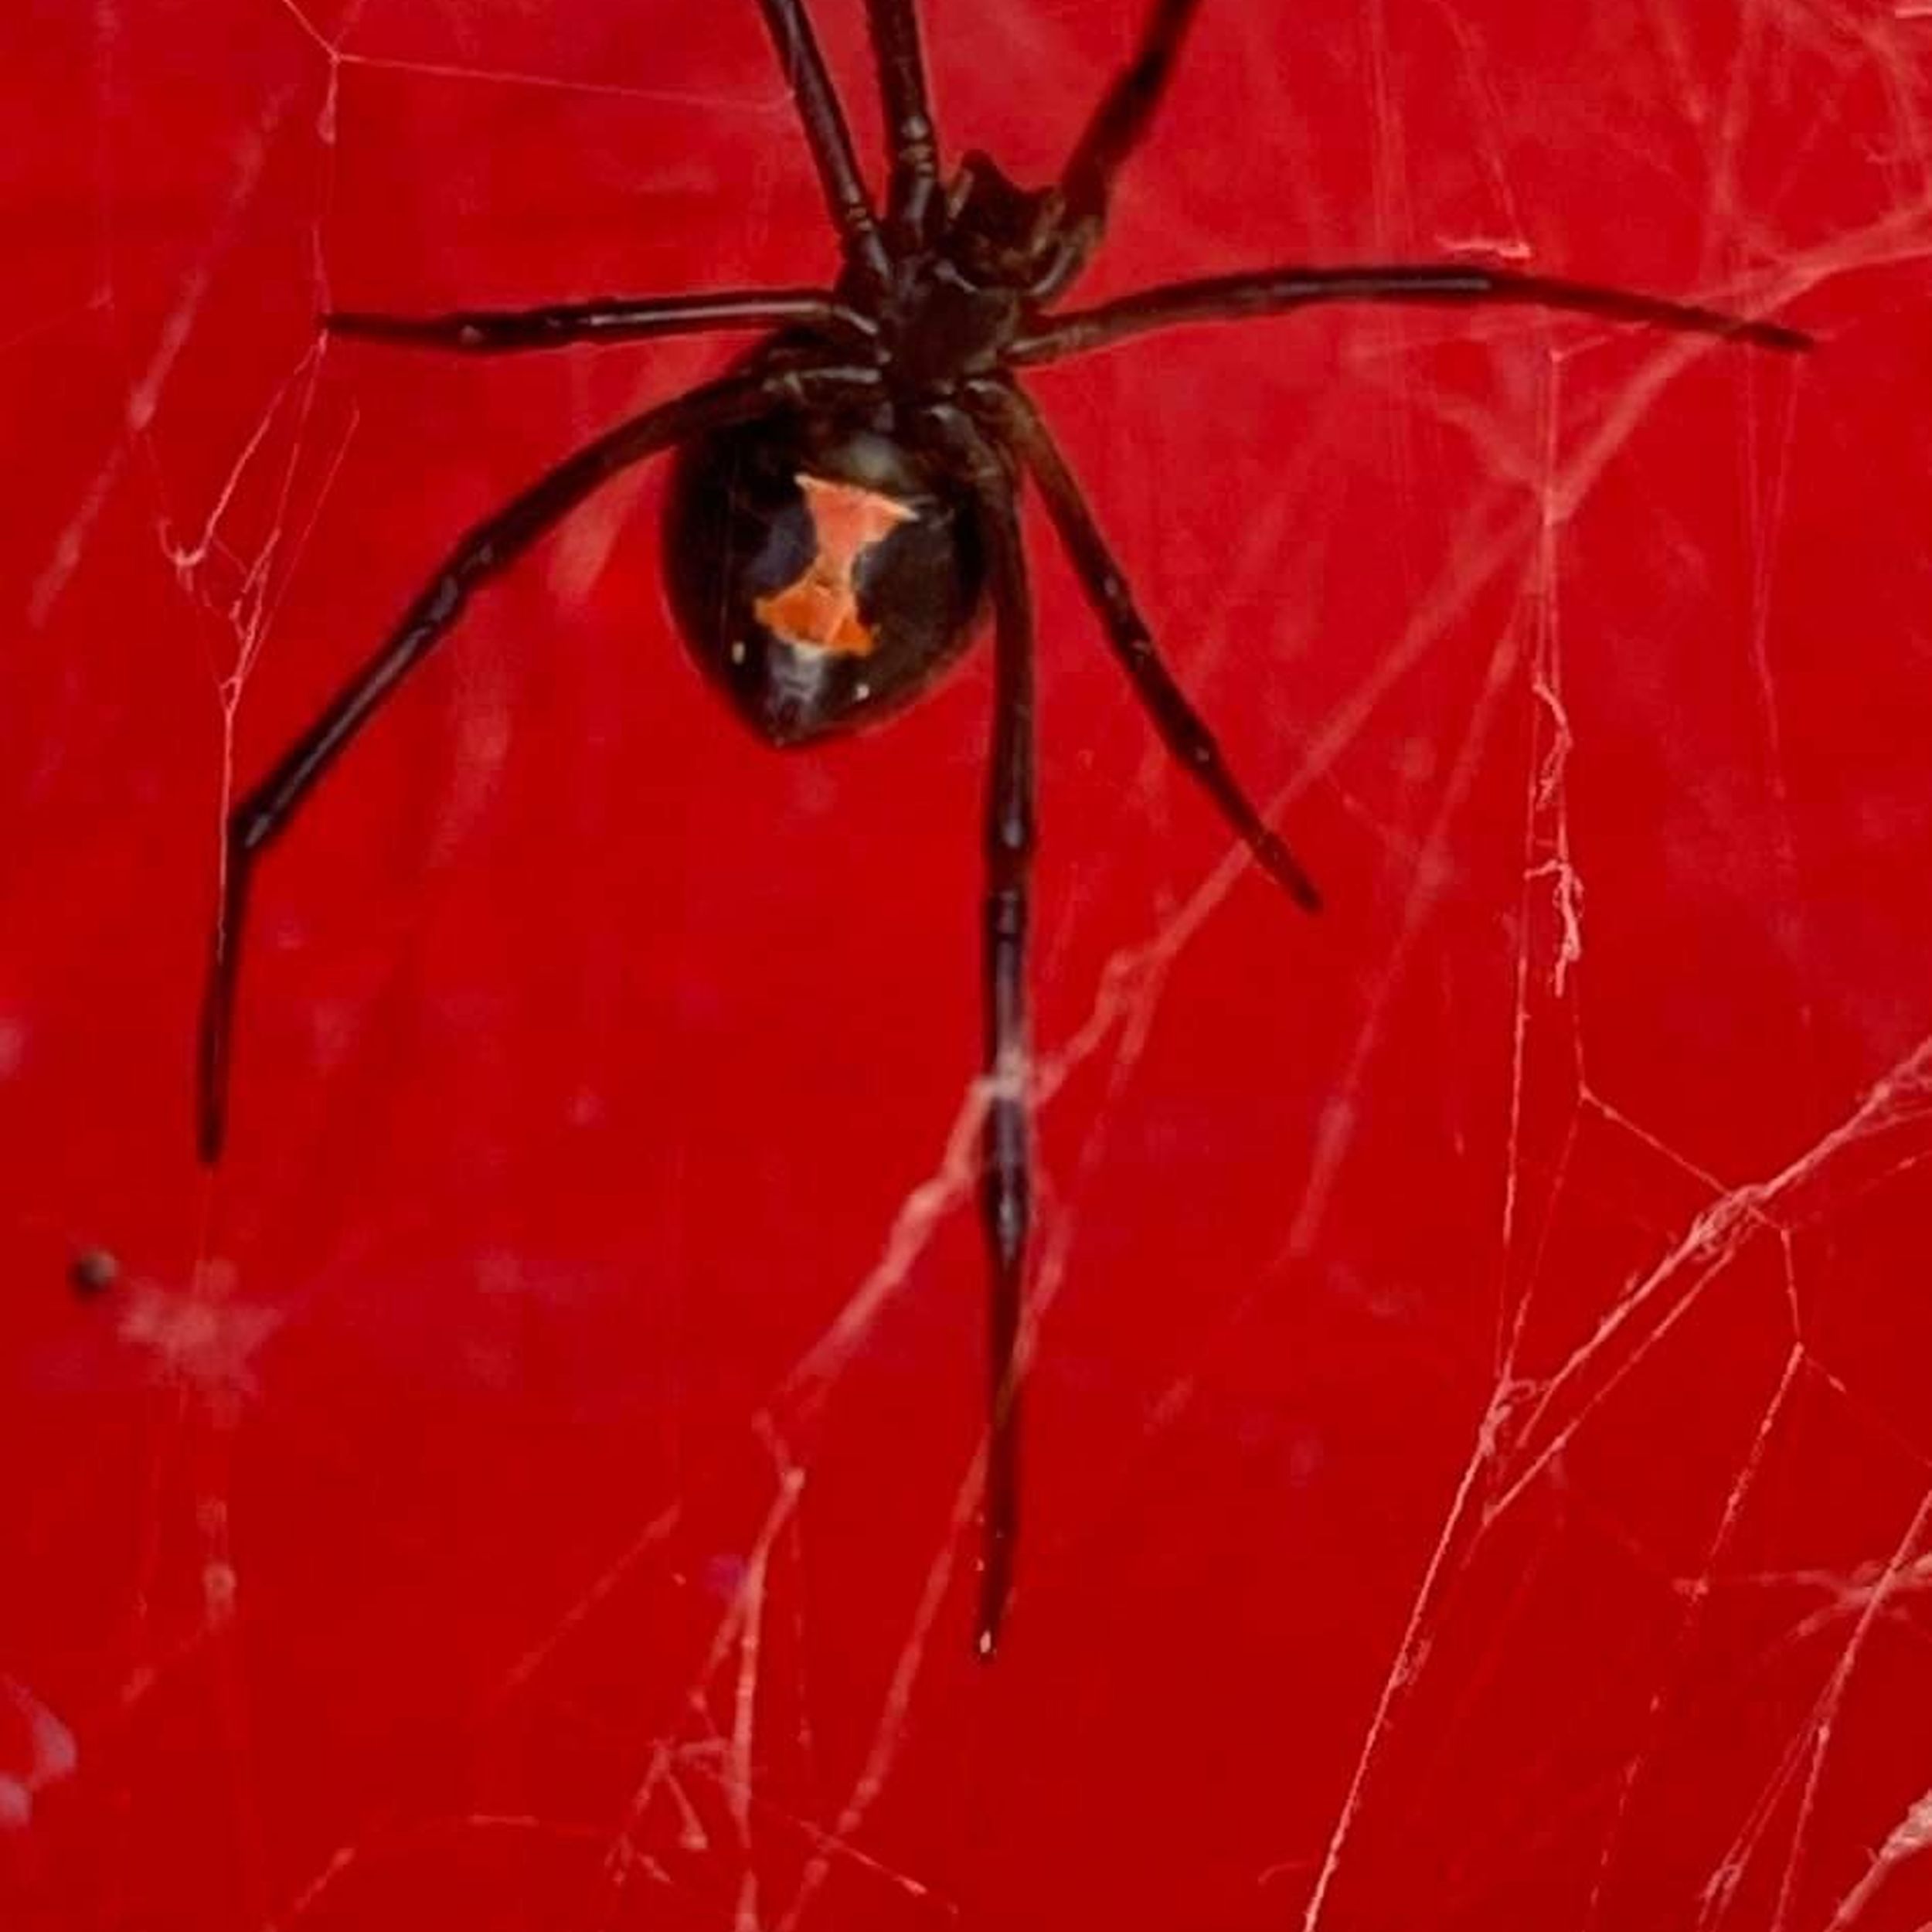 Let's Talk About Black Widow Spider Control In Owensboro